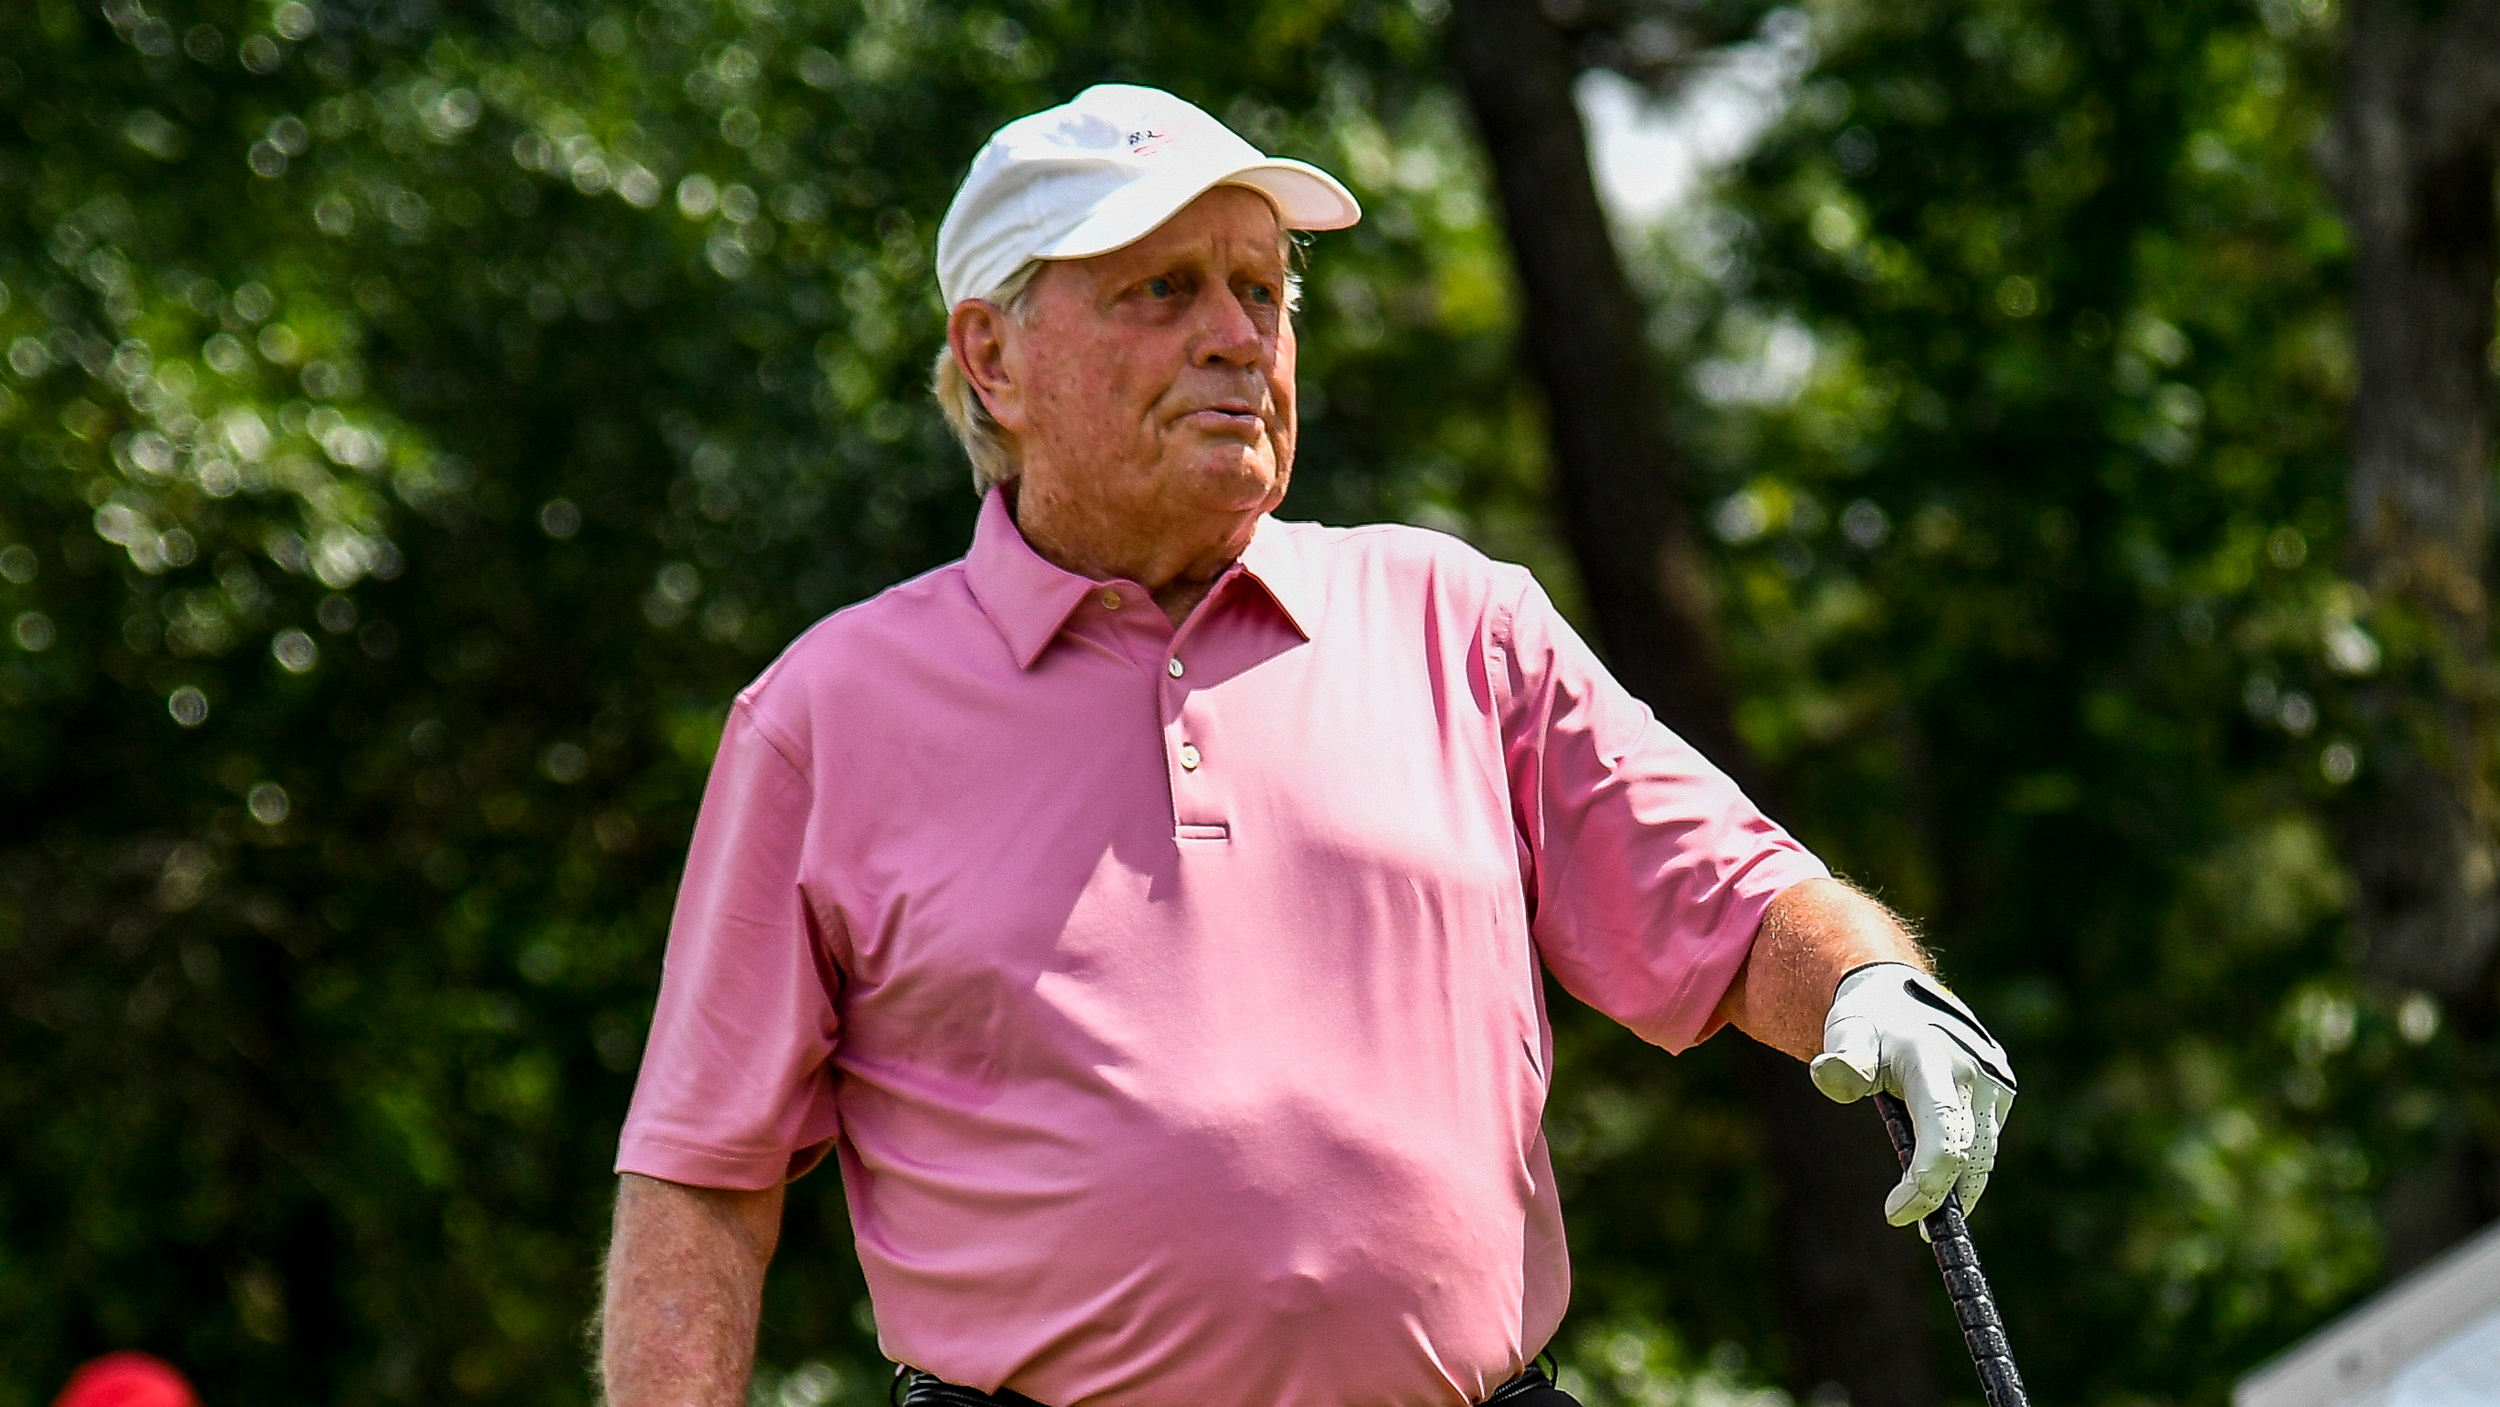 Jack Nicklaus wearing a pink polo shirt and white cap